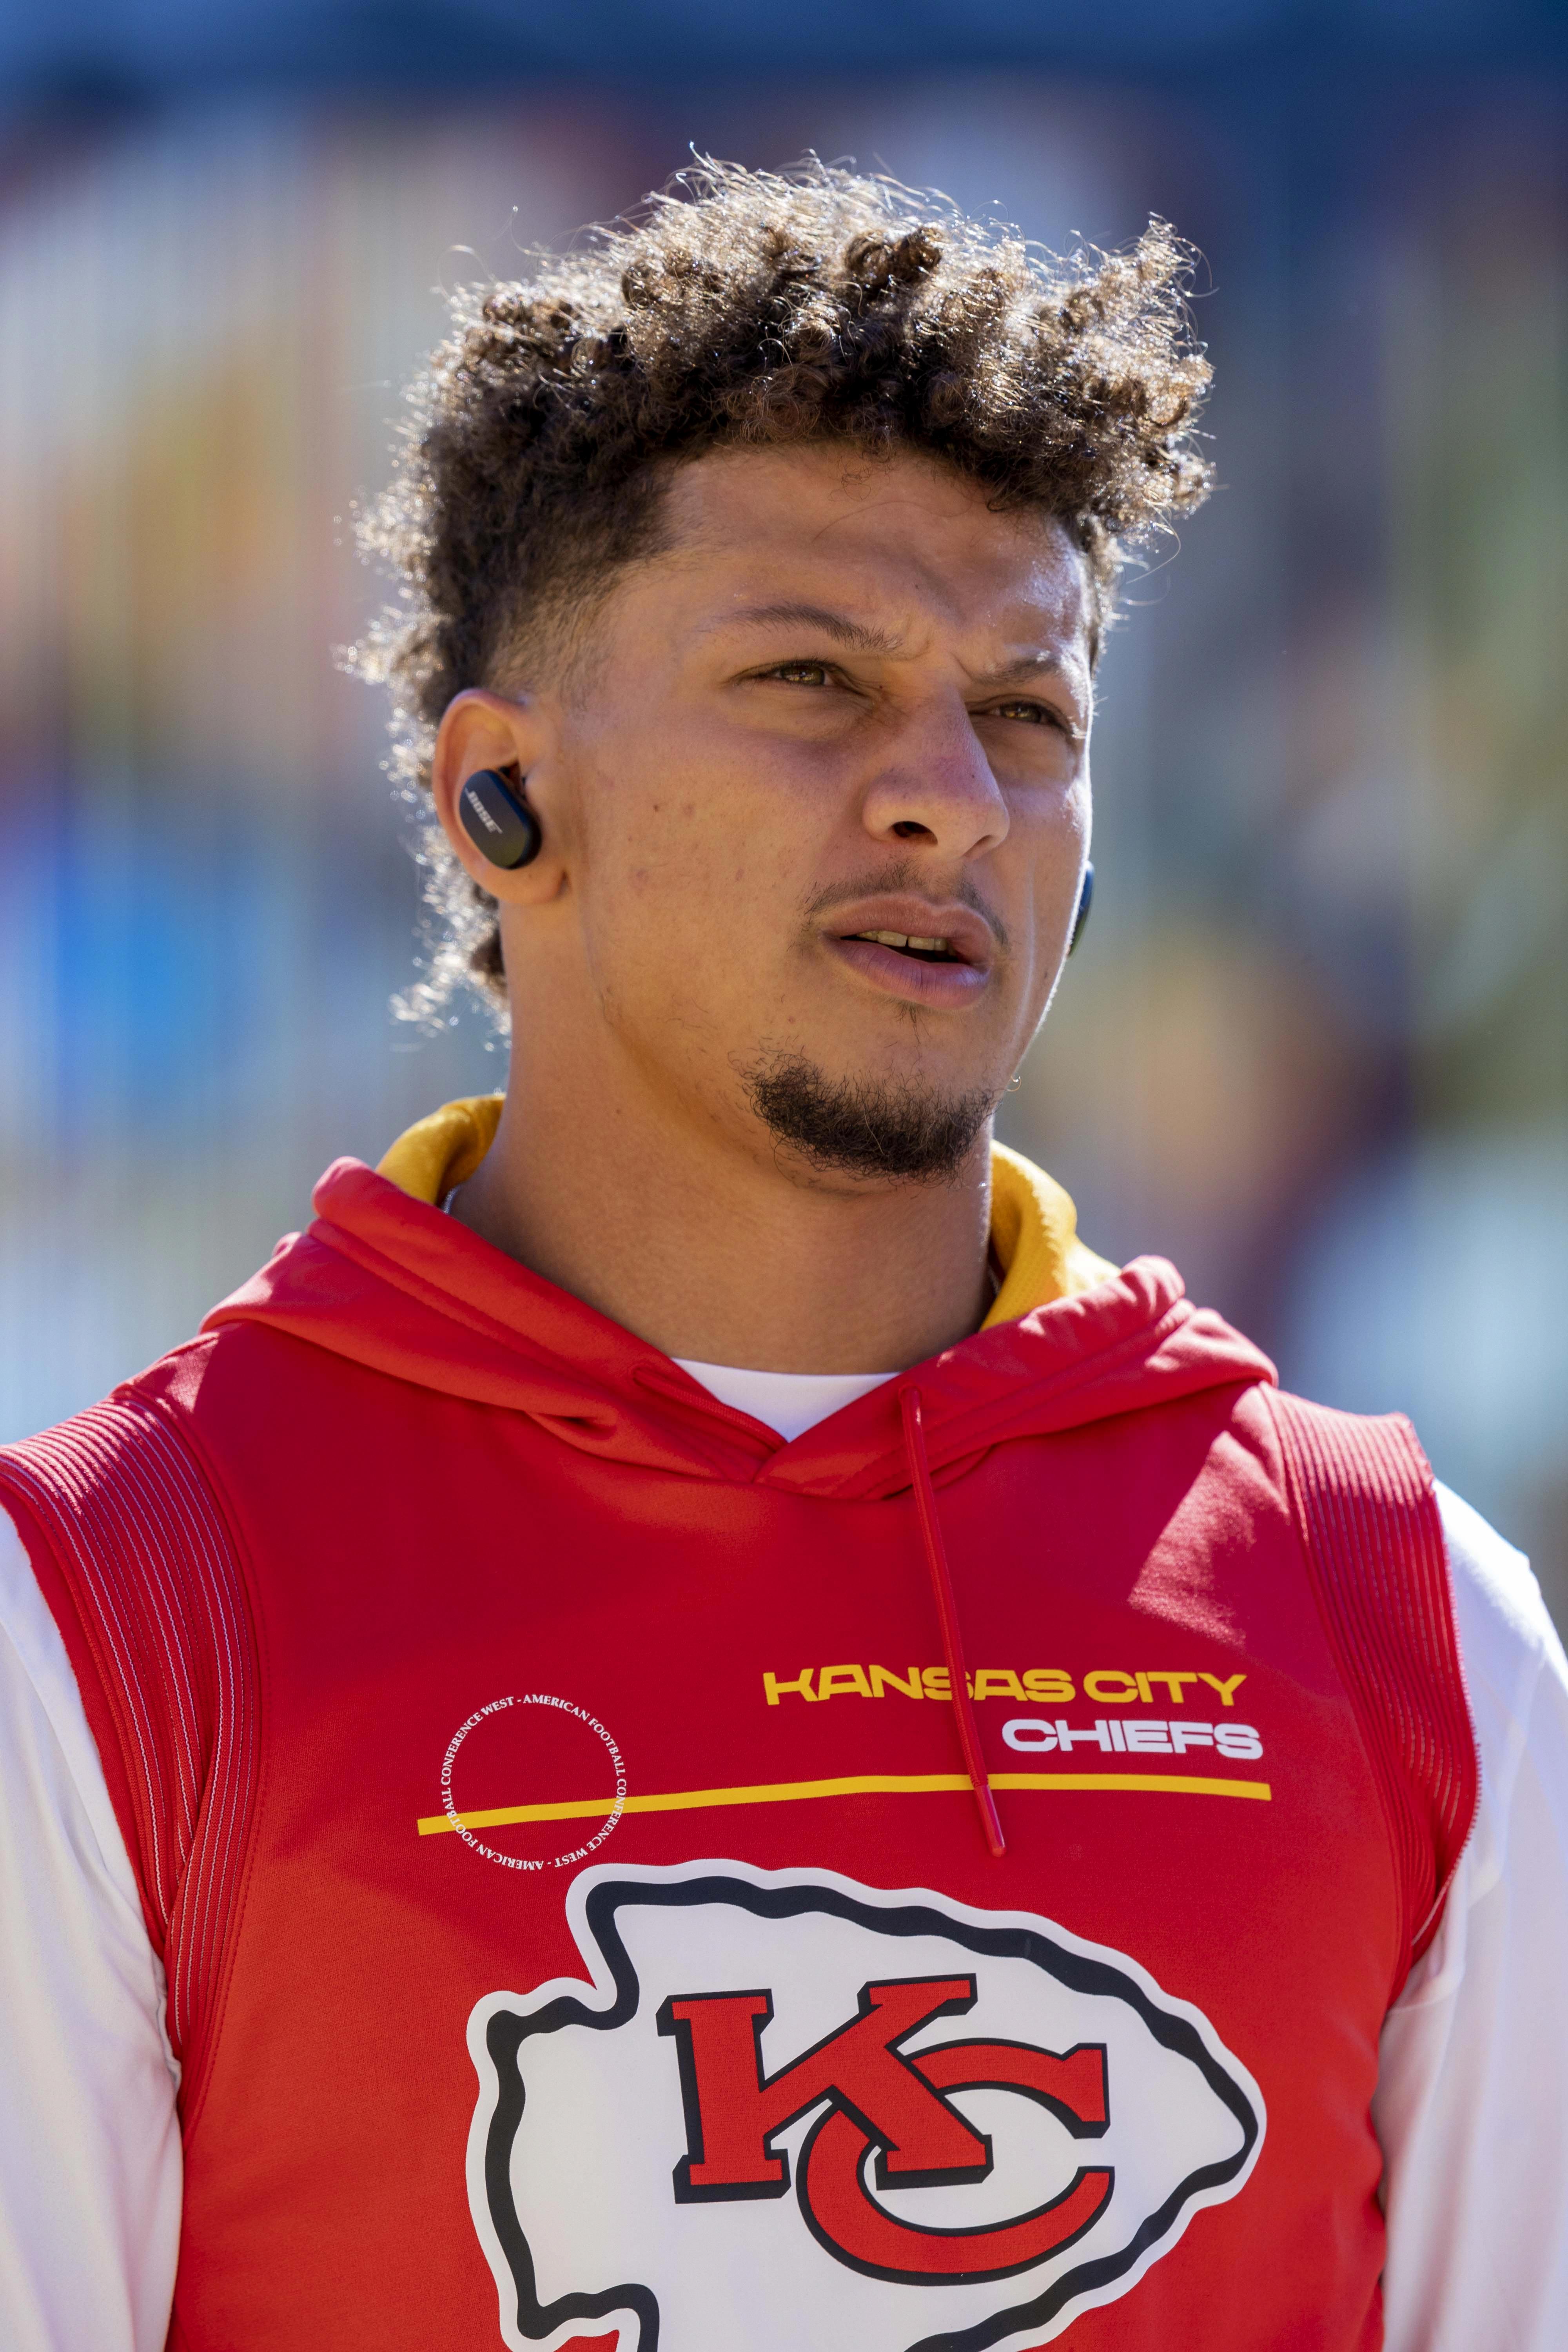 where did mahomes go to college